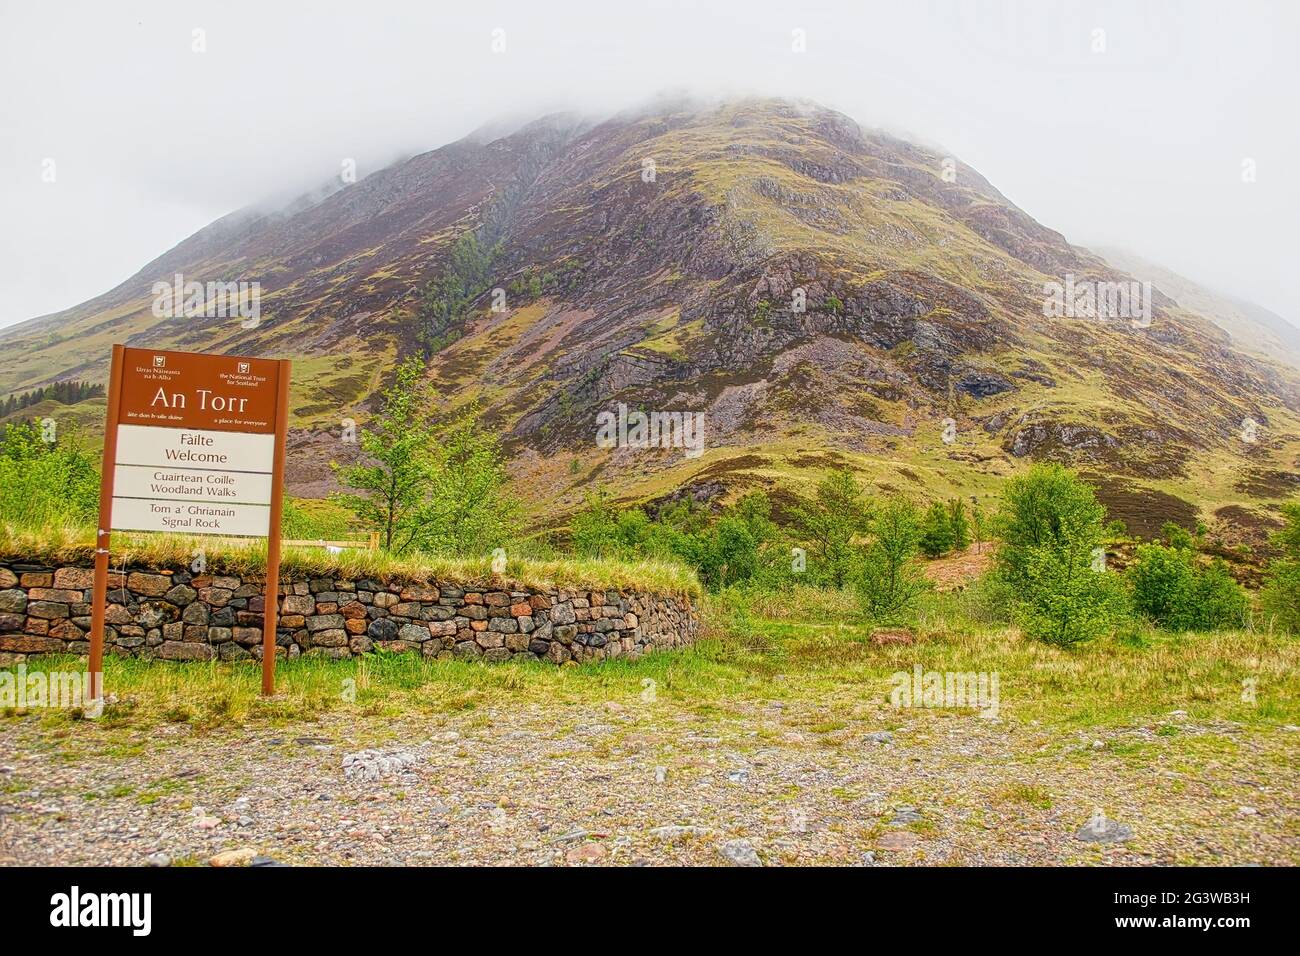 Sign Board of An Torr and Signal Rock near A82 road of Scottish Highlands. Taken in Scotland, United Kingdom on Jun 1, 2013. Stock Photo